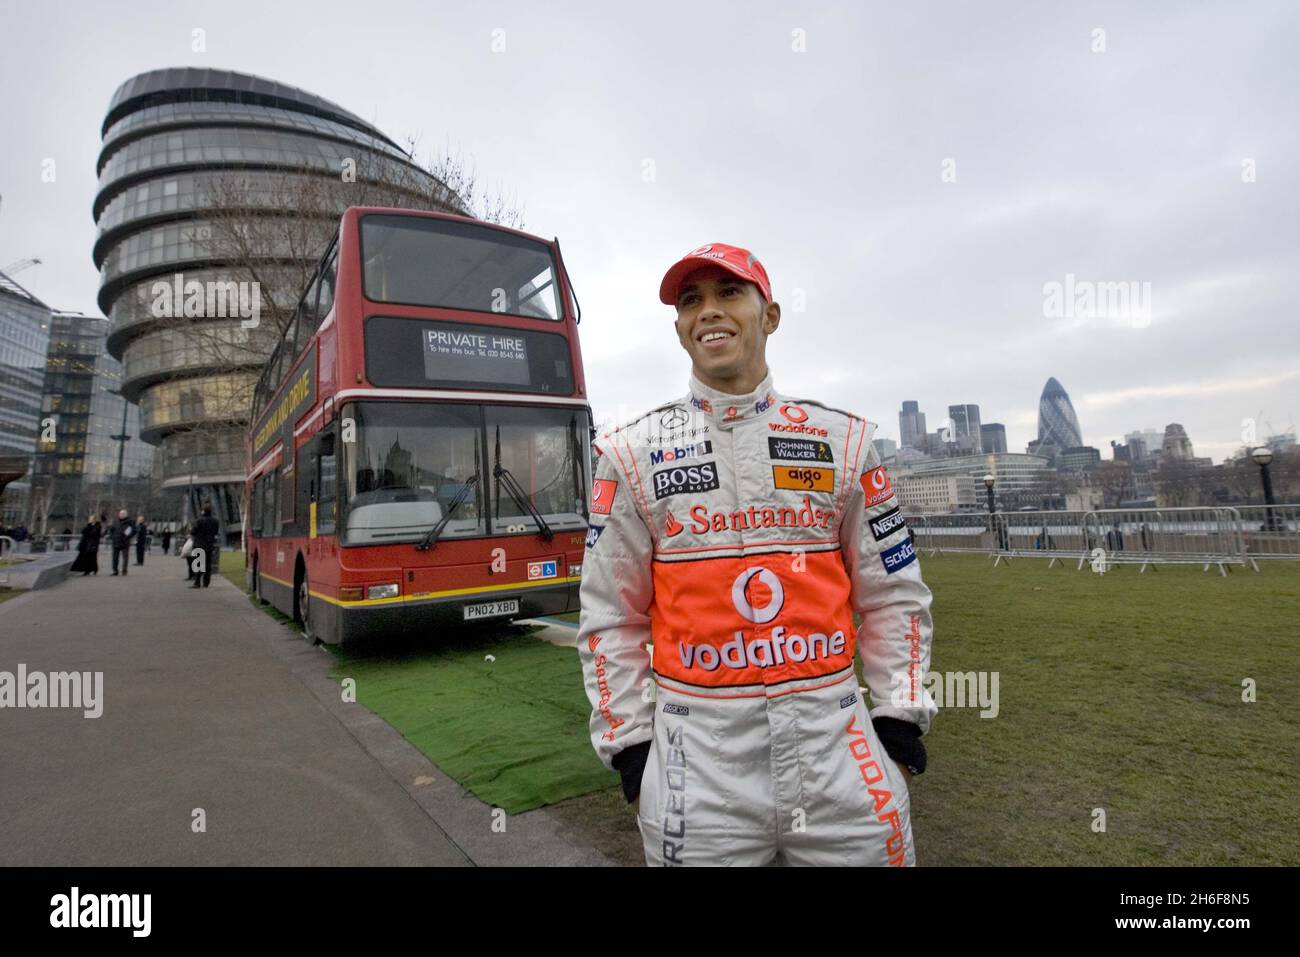 Lewis Hamilton, the 2008 Formula 1 World Champion, during the Johnnie Walker  anti-drink drive campaign, reminding people to never drink and drive and to  use public transport to get home safely over